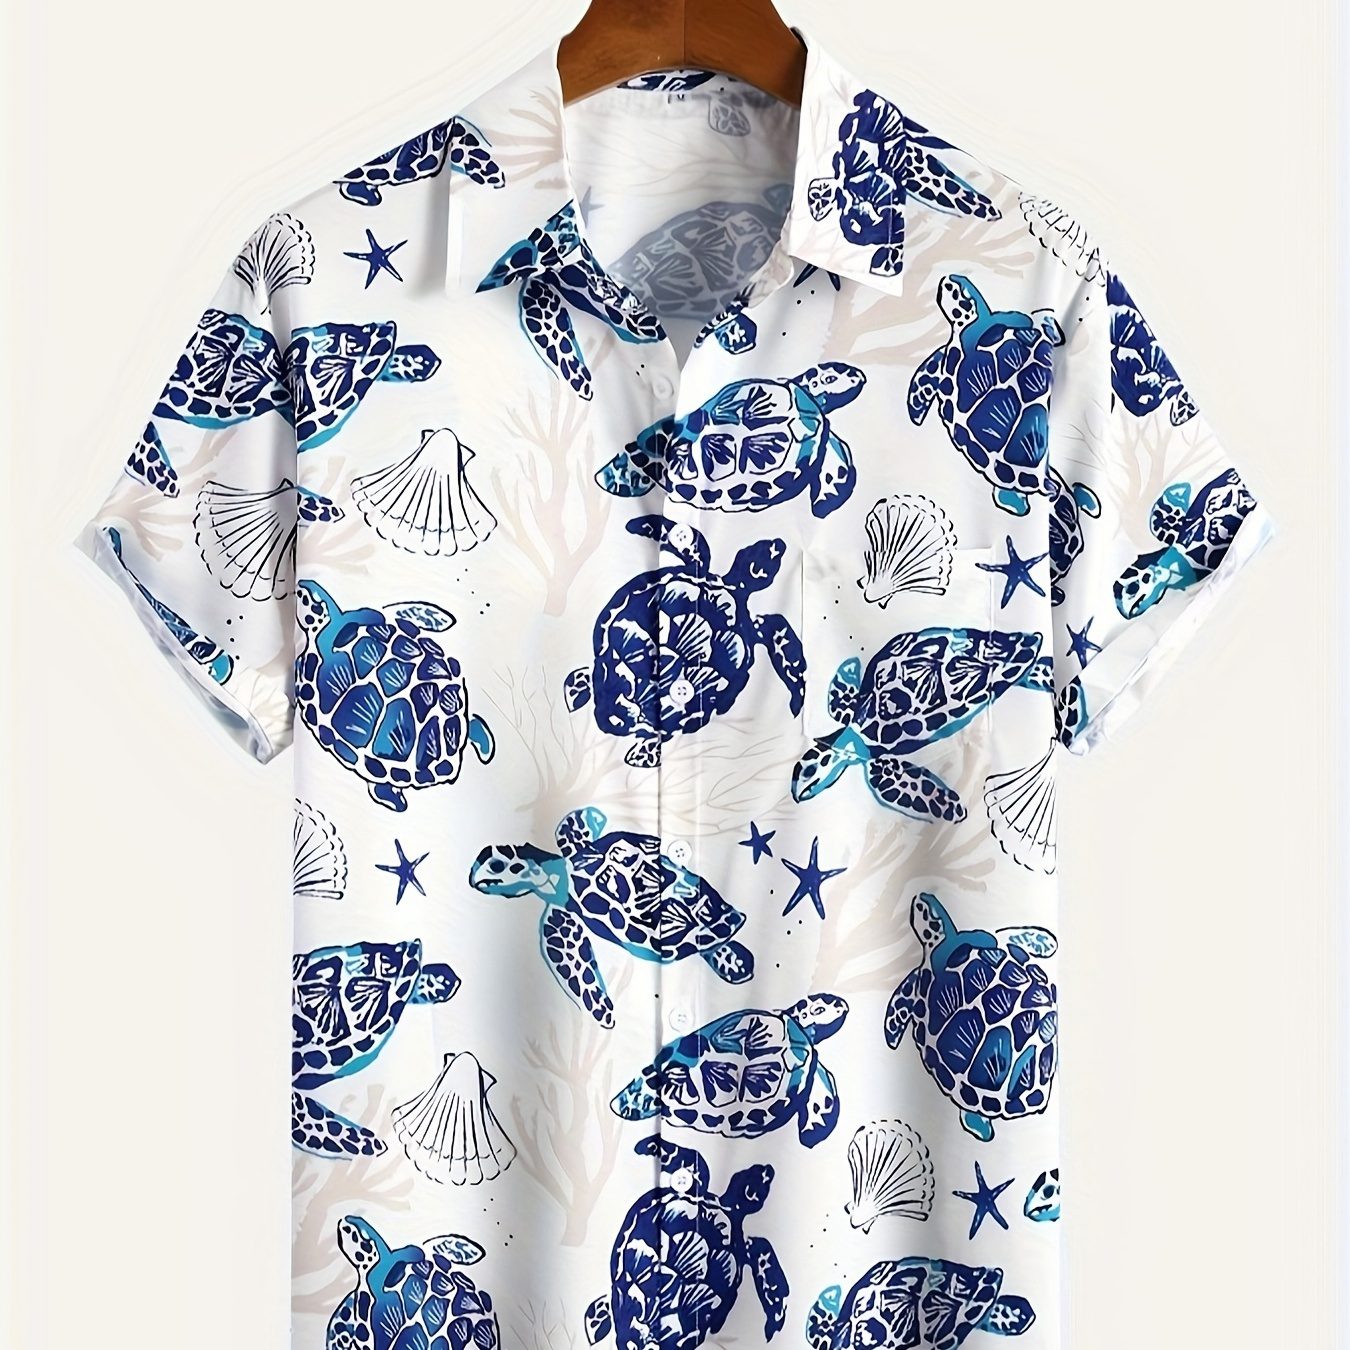 

Hawaiian Style Turtle Print Men's Short Sleeve Shirt With Chest Pocket, Men's Trendy Shirt For Summer Outdoor